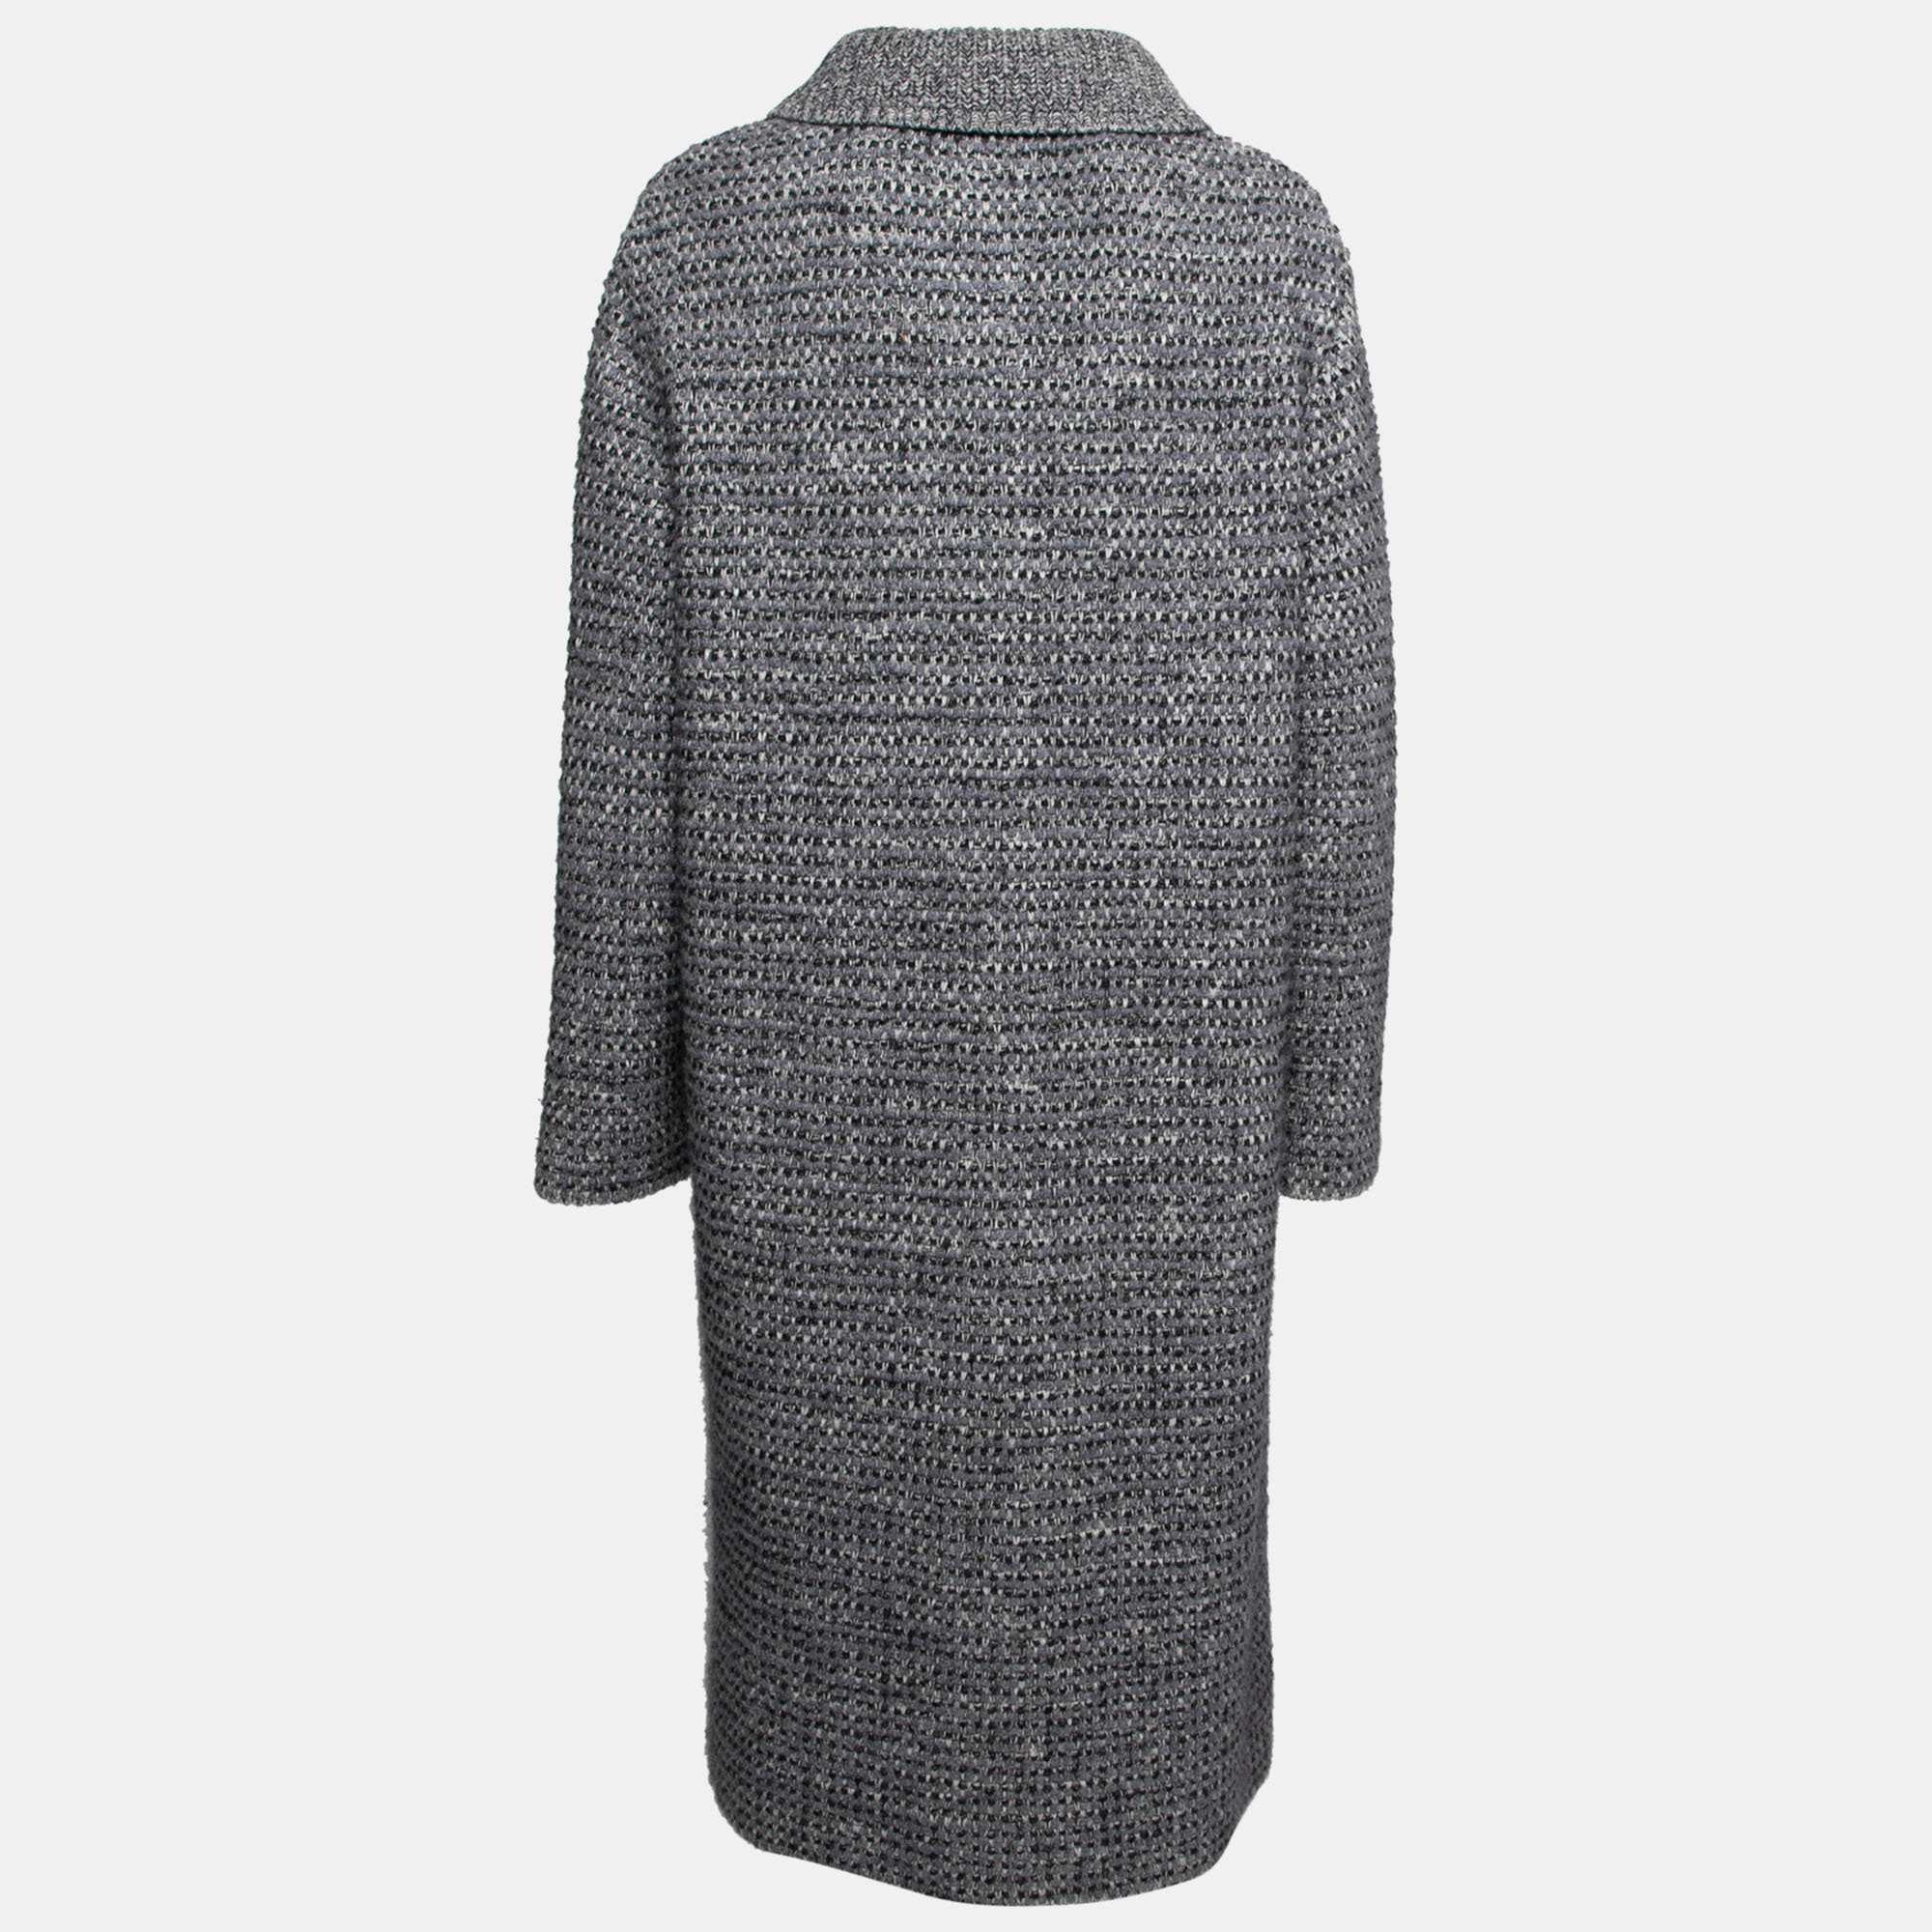 

Christian Black and Grey Knit Long Sleeve Button Front Long Cardigan